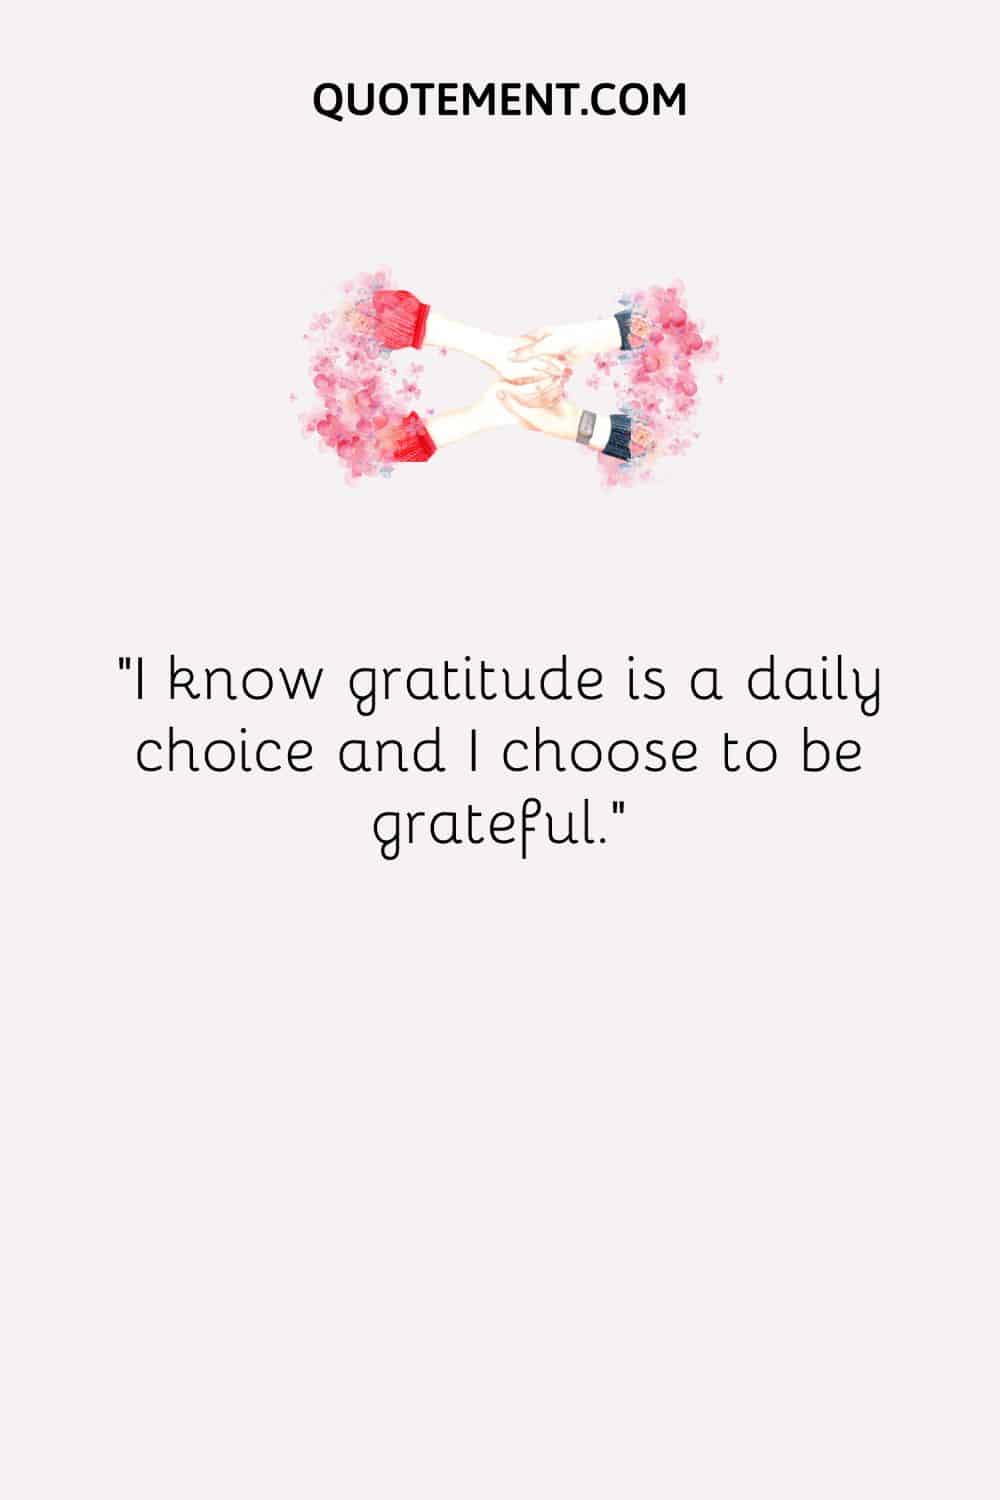 I know gratitude is a daily choice and I choose to be grateful